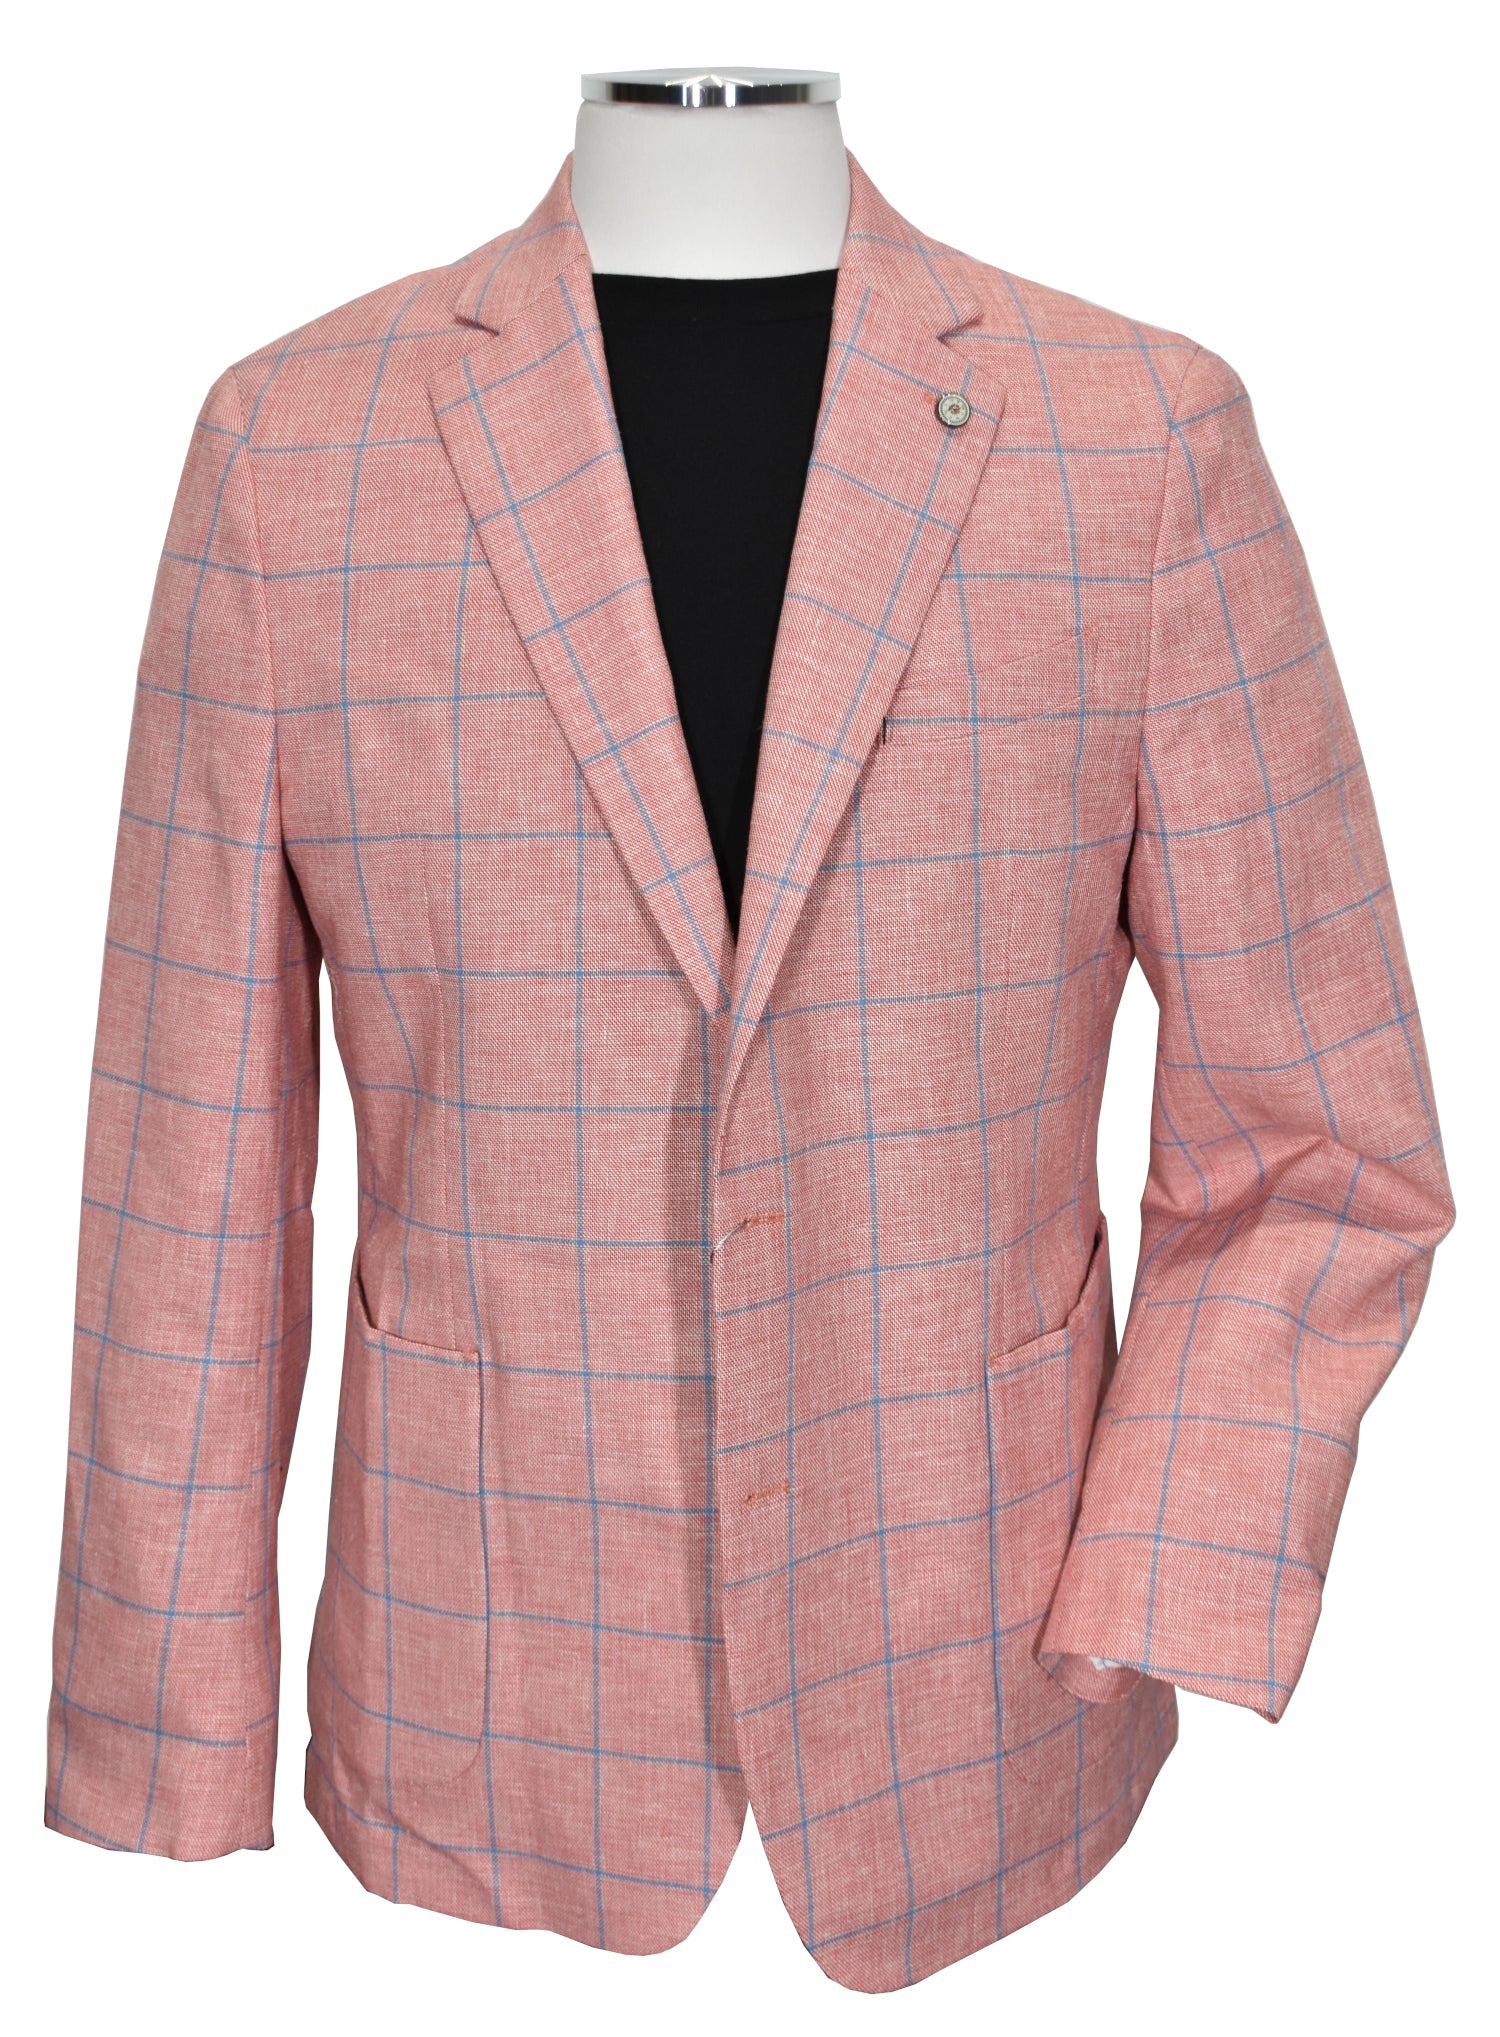 Style this fashion sport coat either cool and casual with jeans or dress it up with a dressy pant and sport shirt. The slim fit stretch model is 72% cotton 26% linen and 2% spandex, and side vented. 